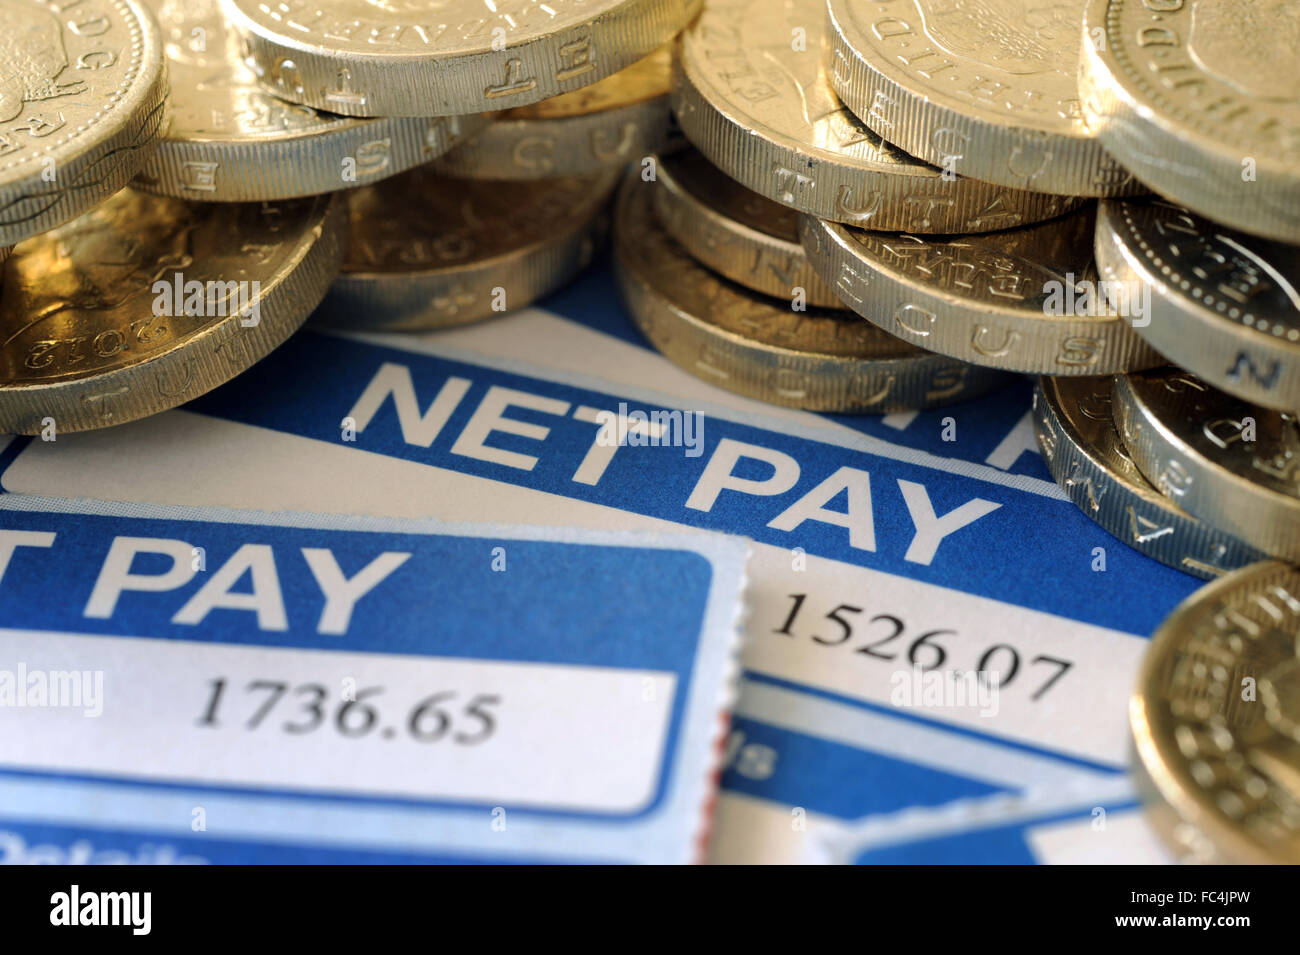 PAYSLIPS SHOWING NET PAY WITH ONE POUND COINS  RE WAGES SALARY WORKERS INCOMES DISPOSABLE INCOME HOUSEHOLD BUDGET JOB JOBS UK Stock Photo